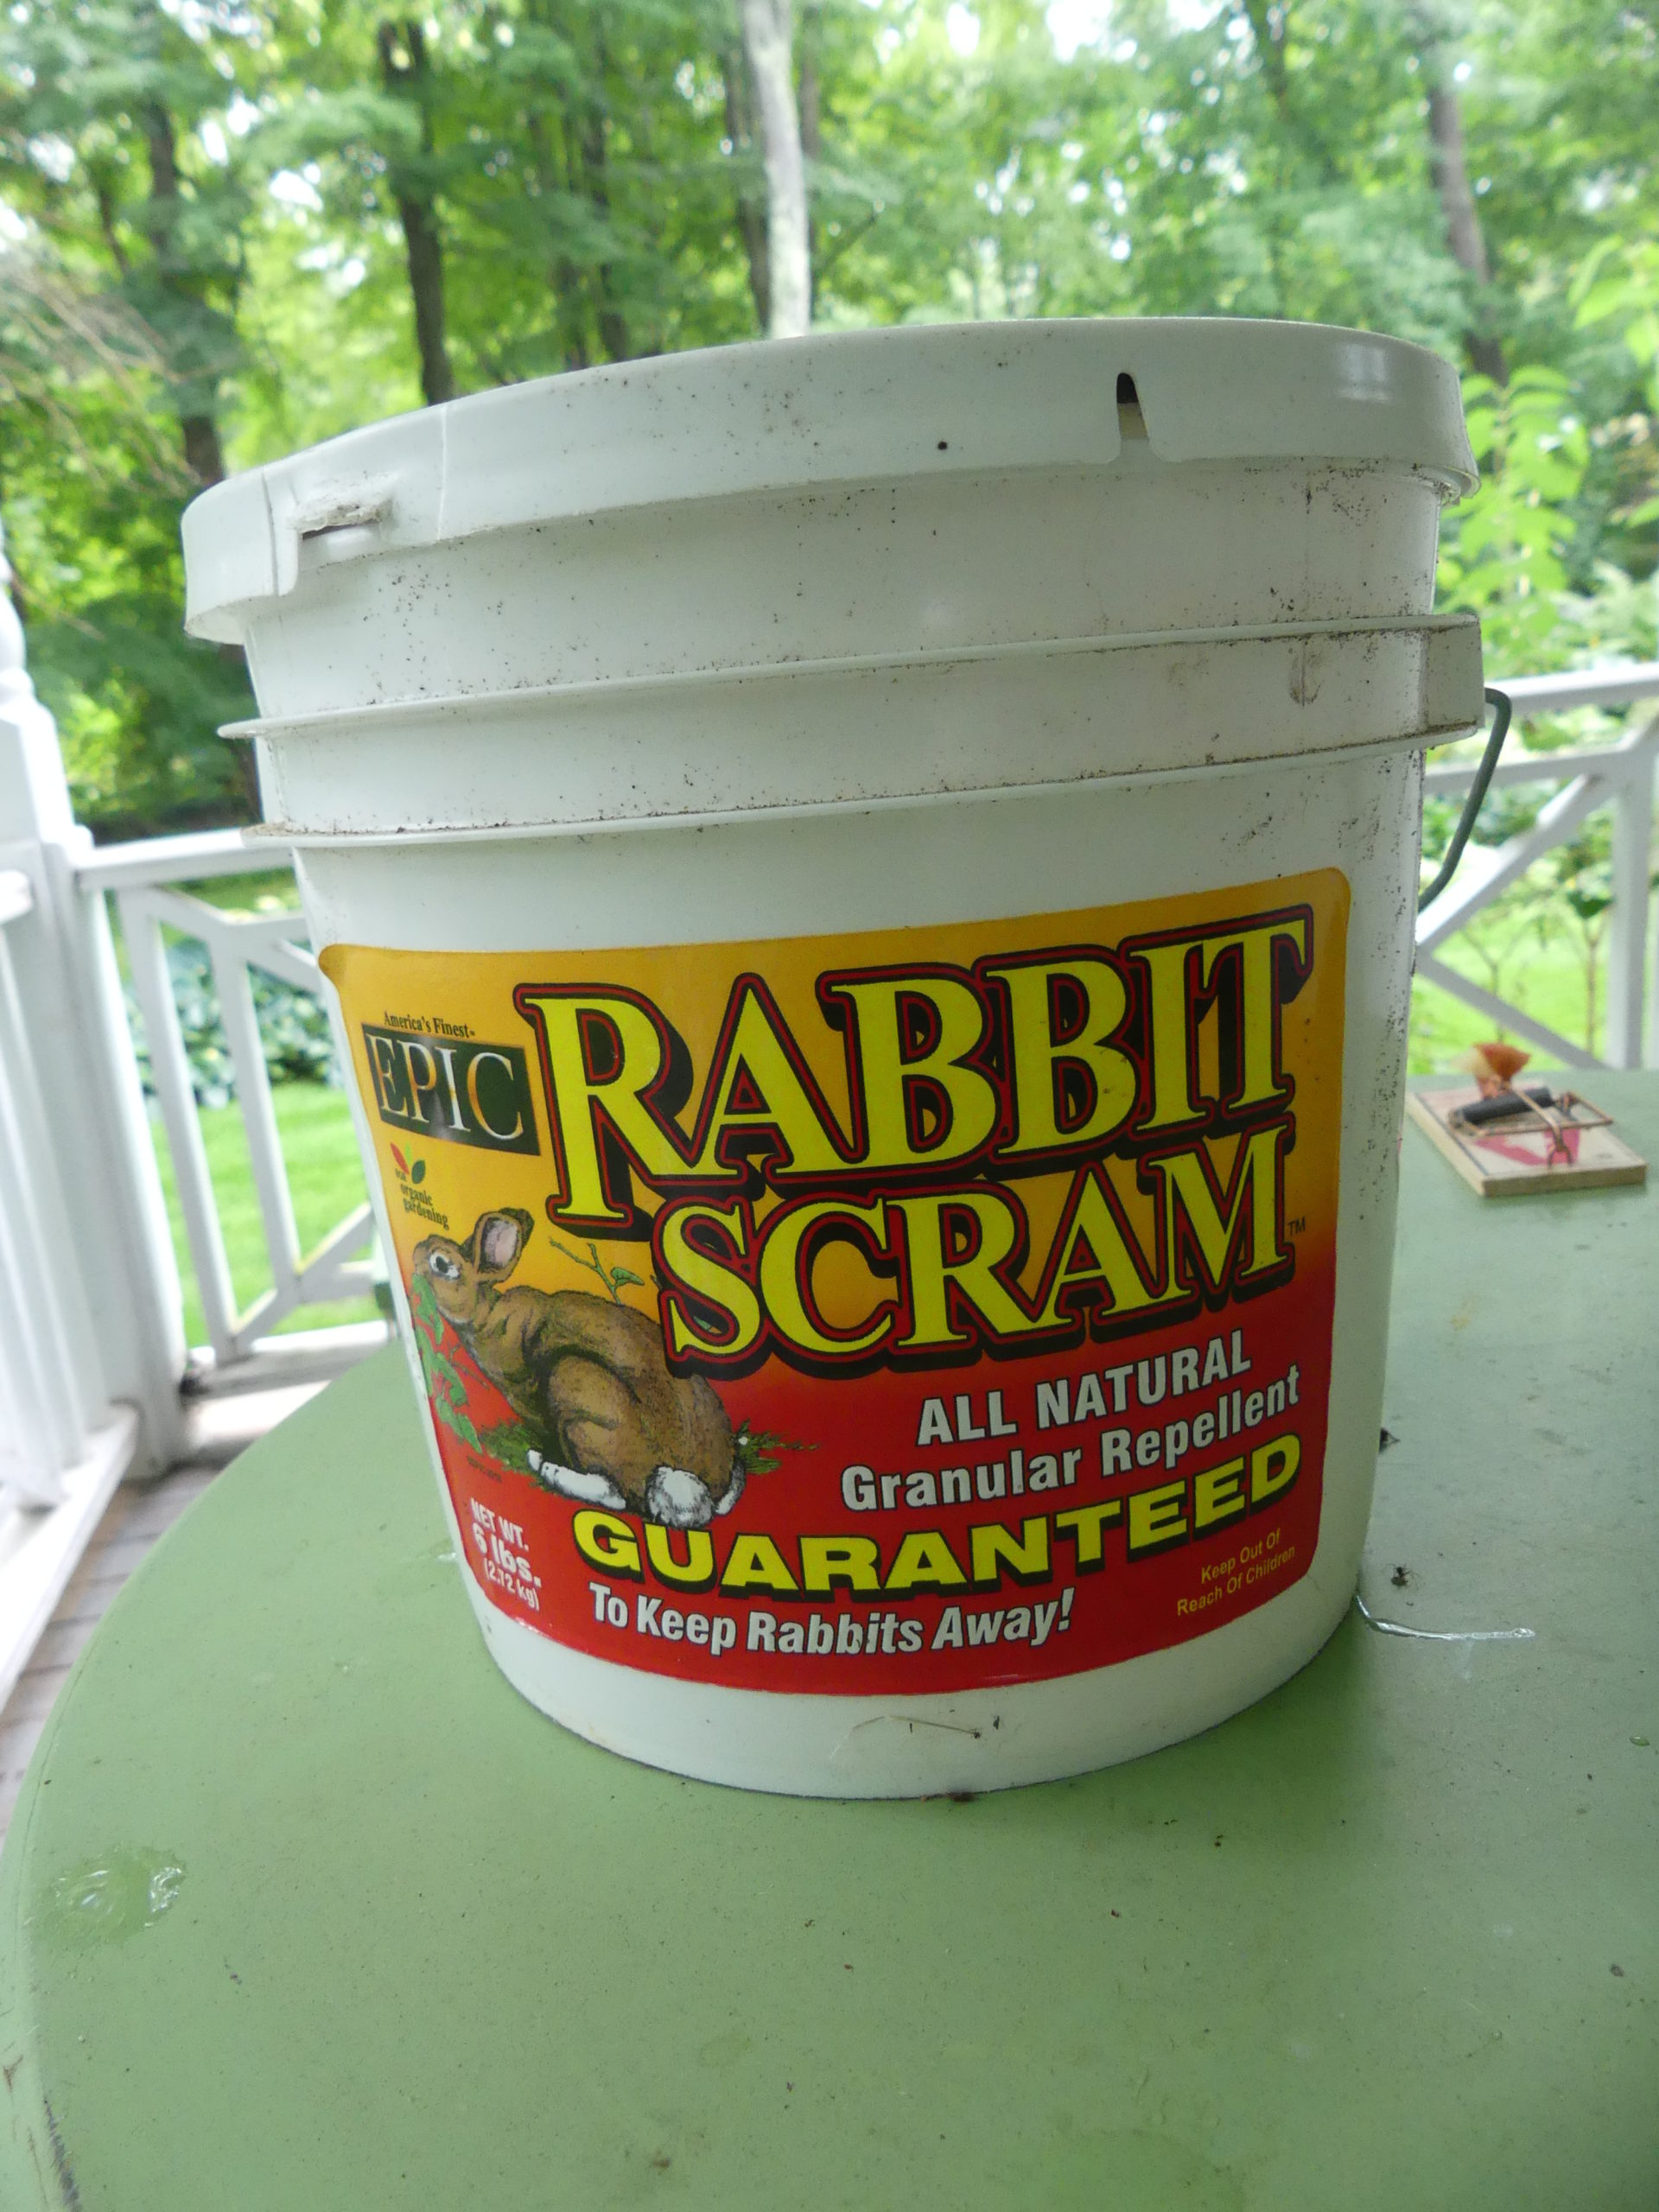 Rabbit Scram can be a helpful deterrent when used as a garden perimeter treatment. It’s expensive but has been effective when used as per the instructions.